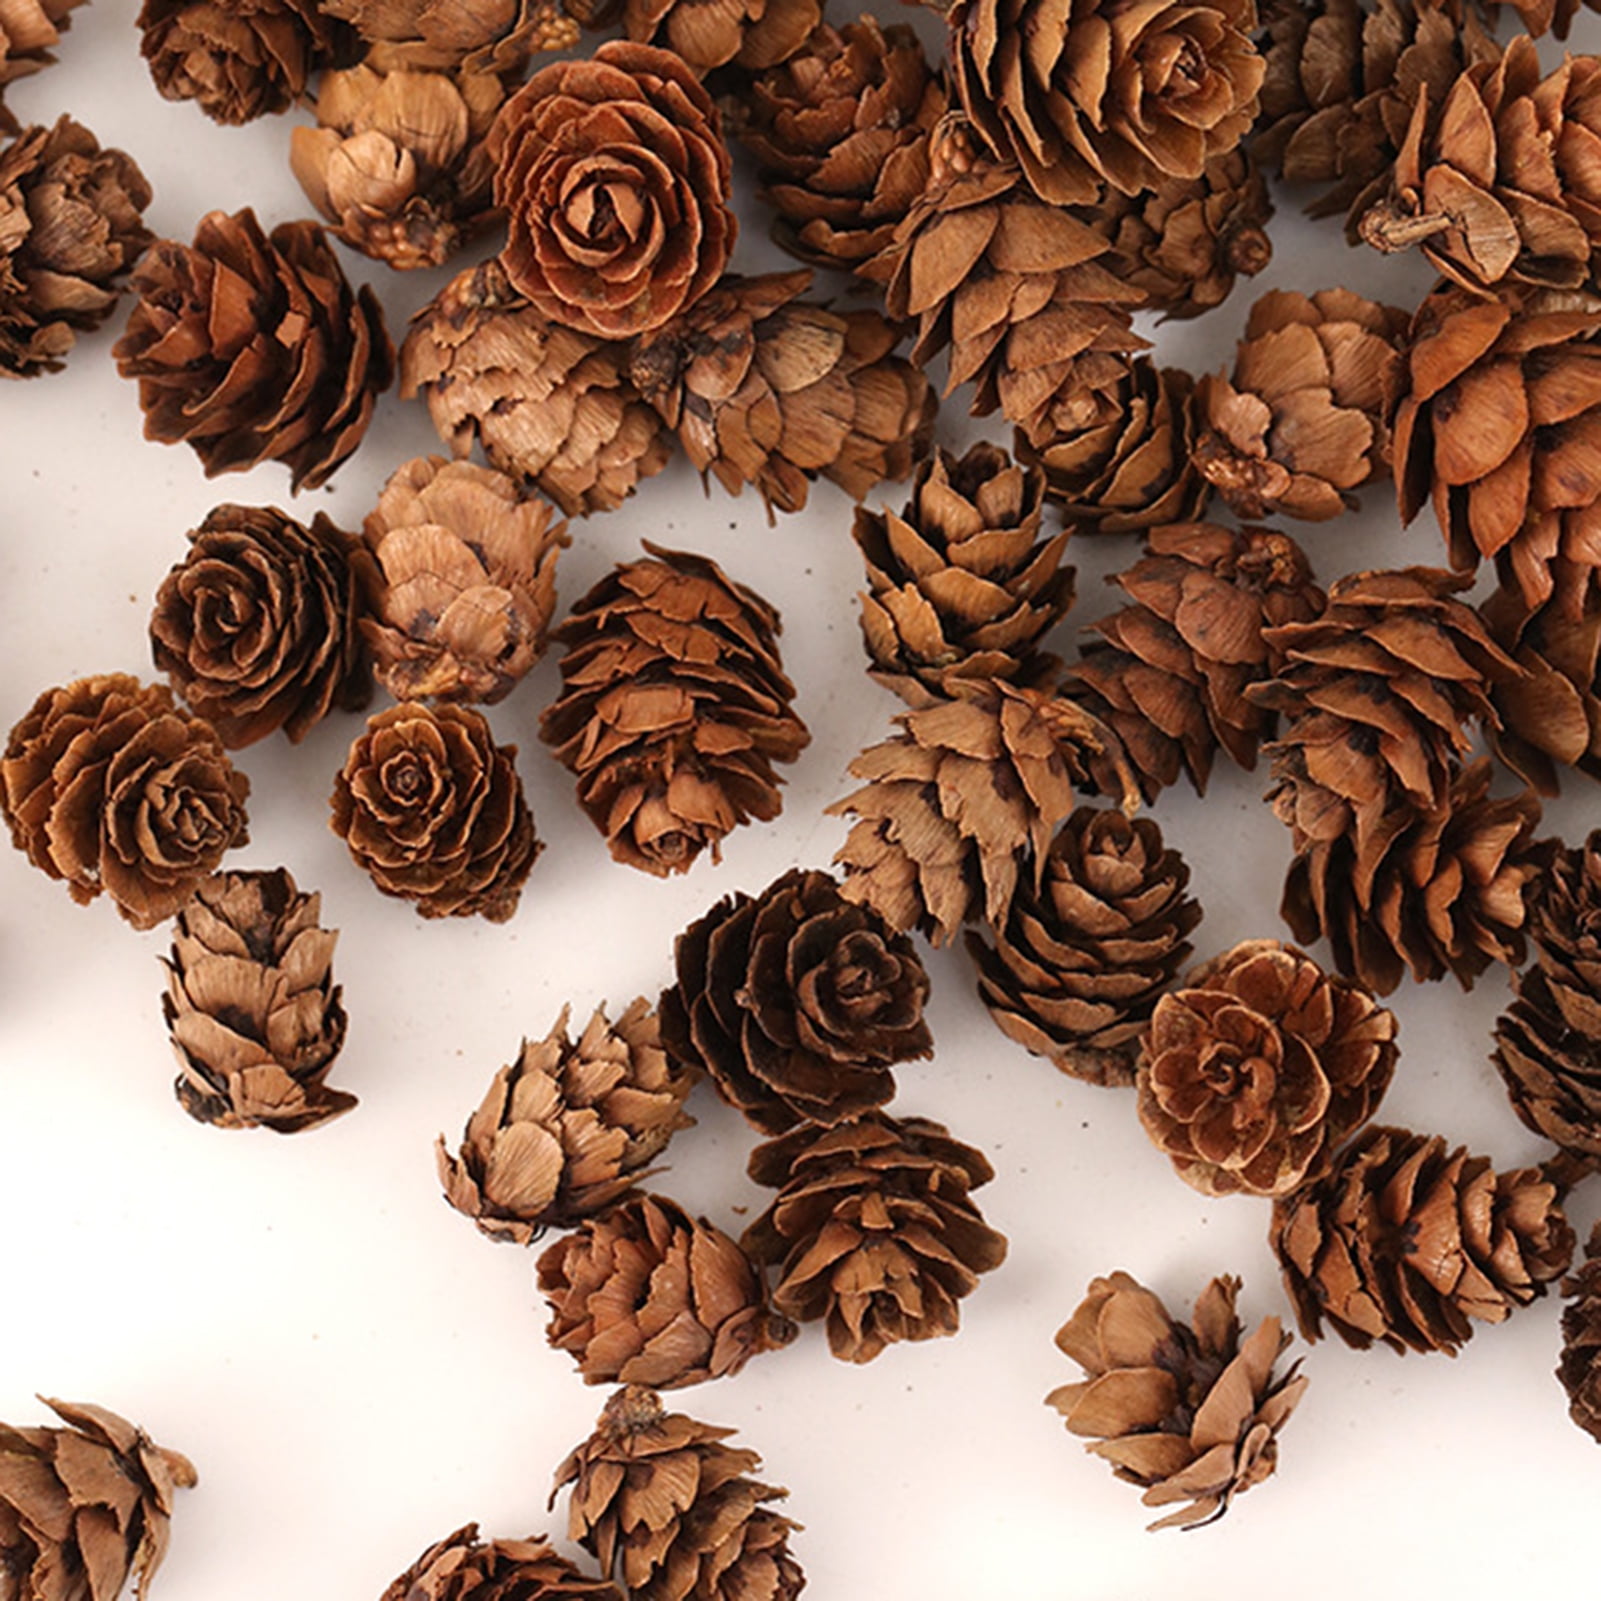 Natural Pine Cones Nuts Artificial Flower Pineapple Cones Fake